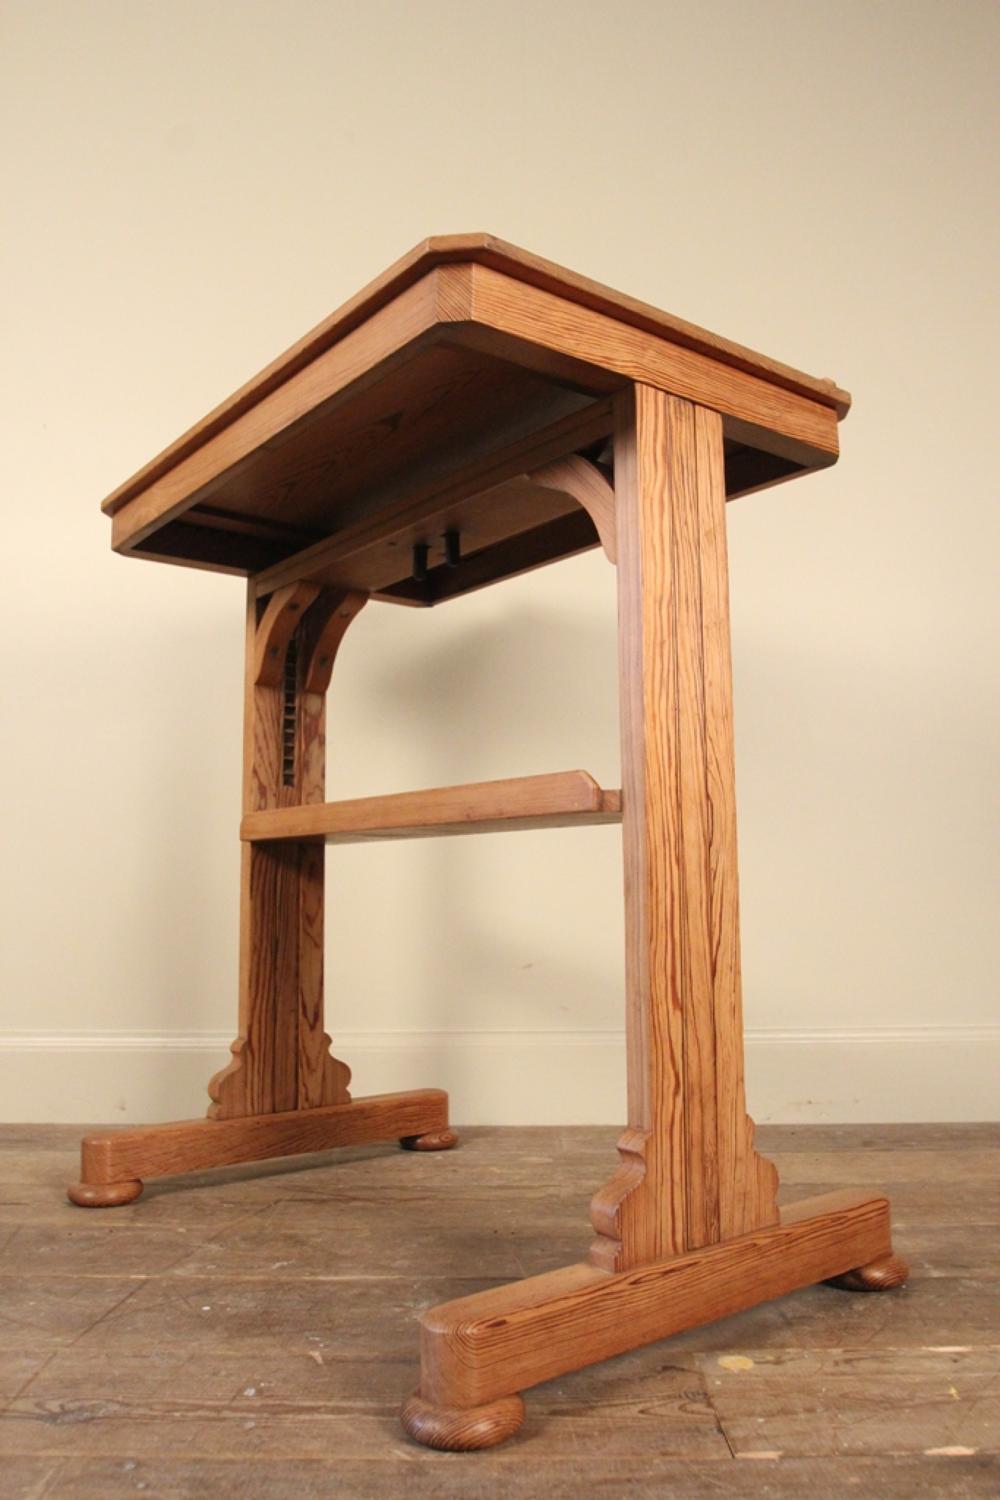 19th C. Small Rise & Fall Architects Table